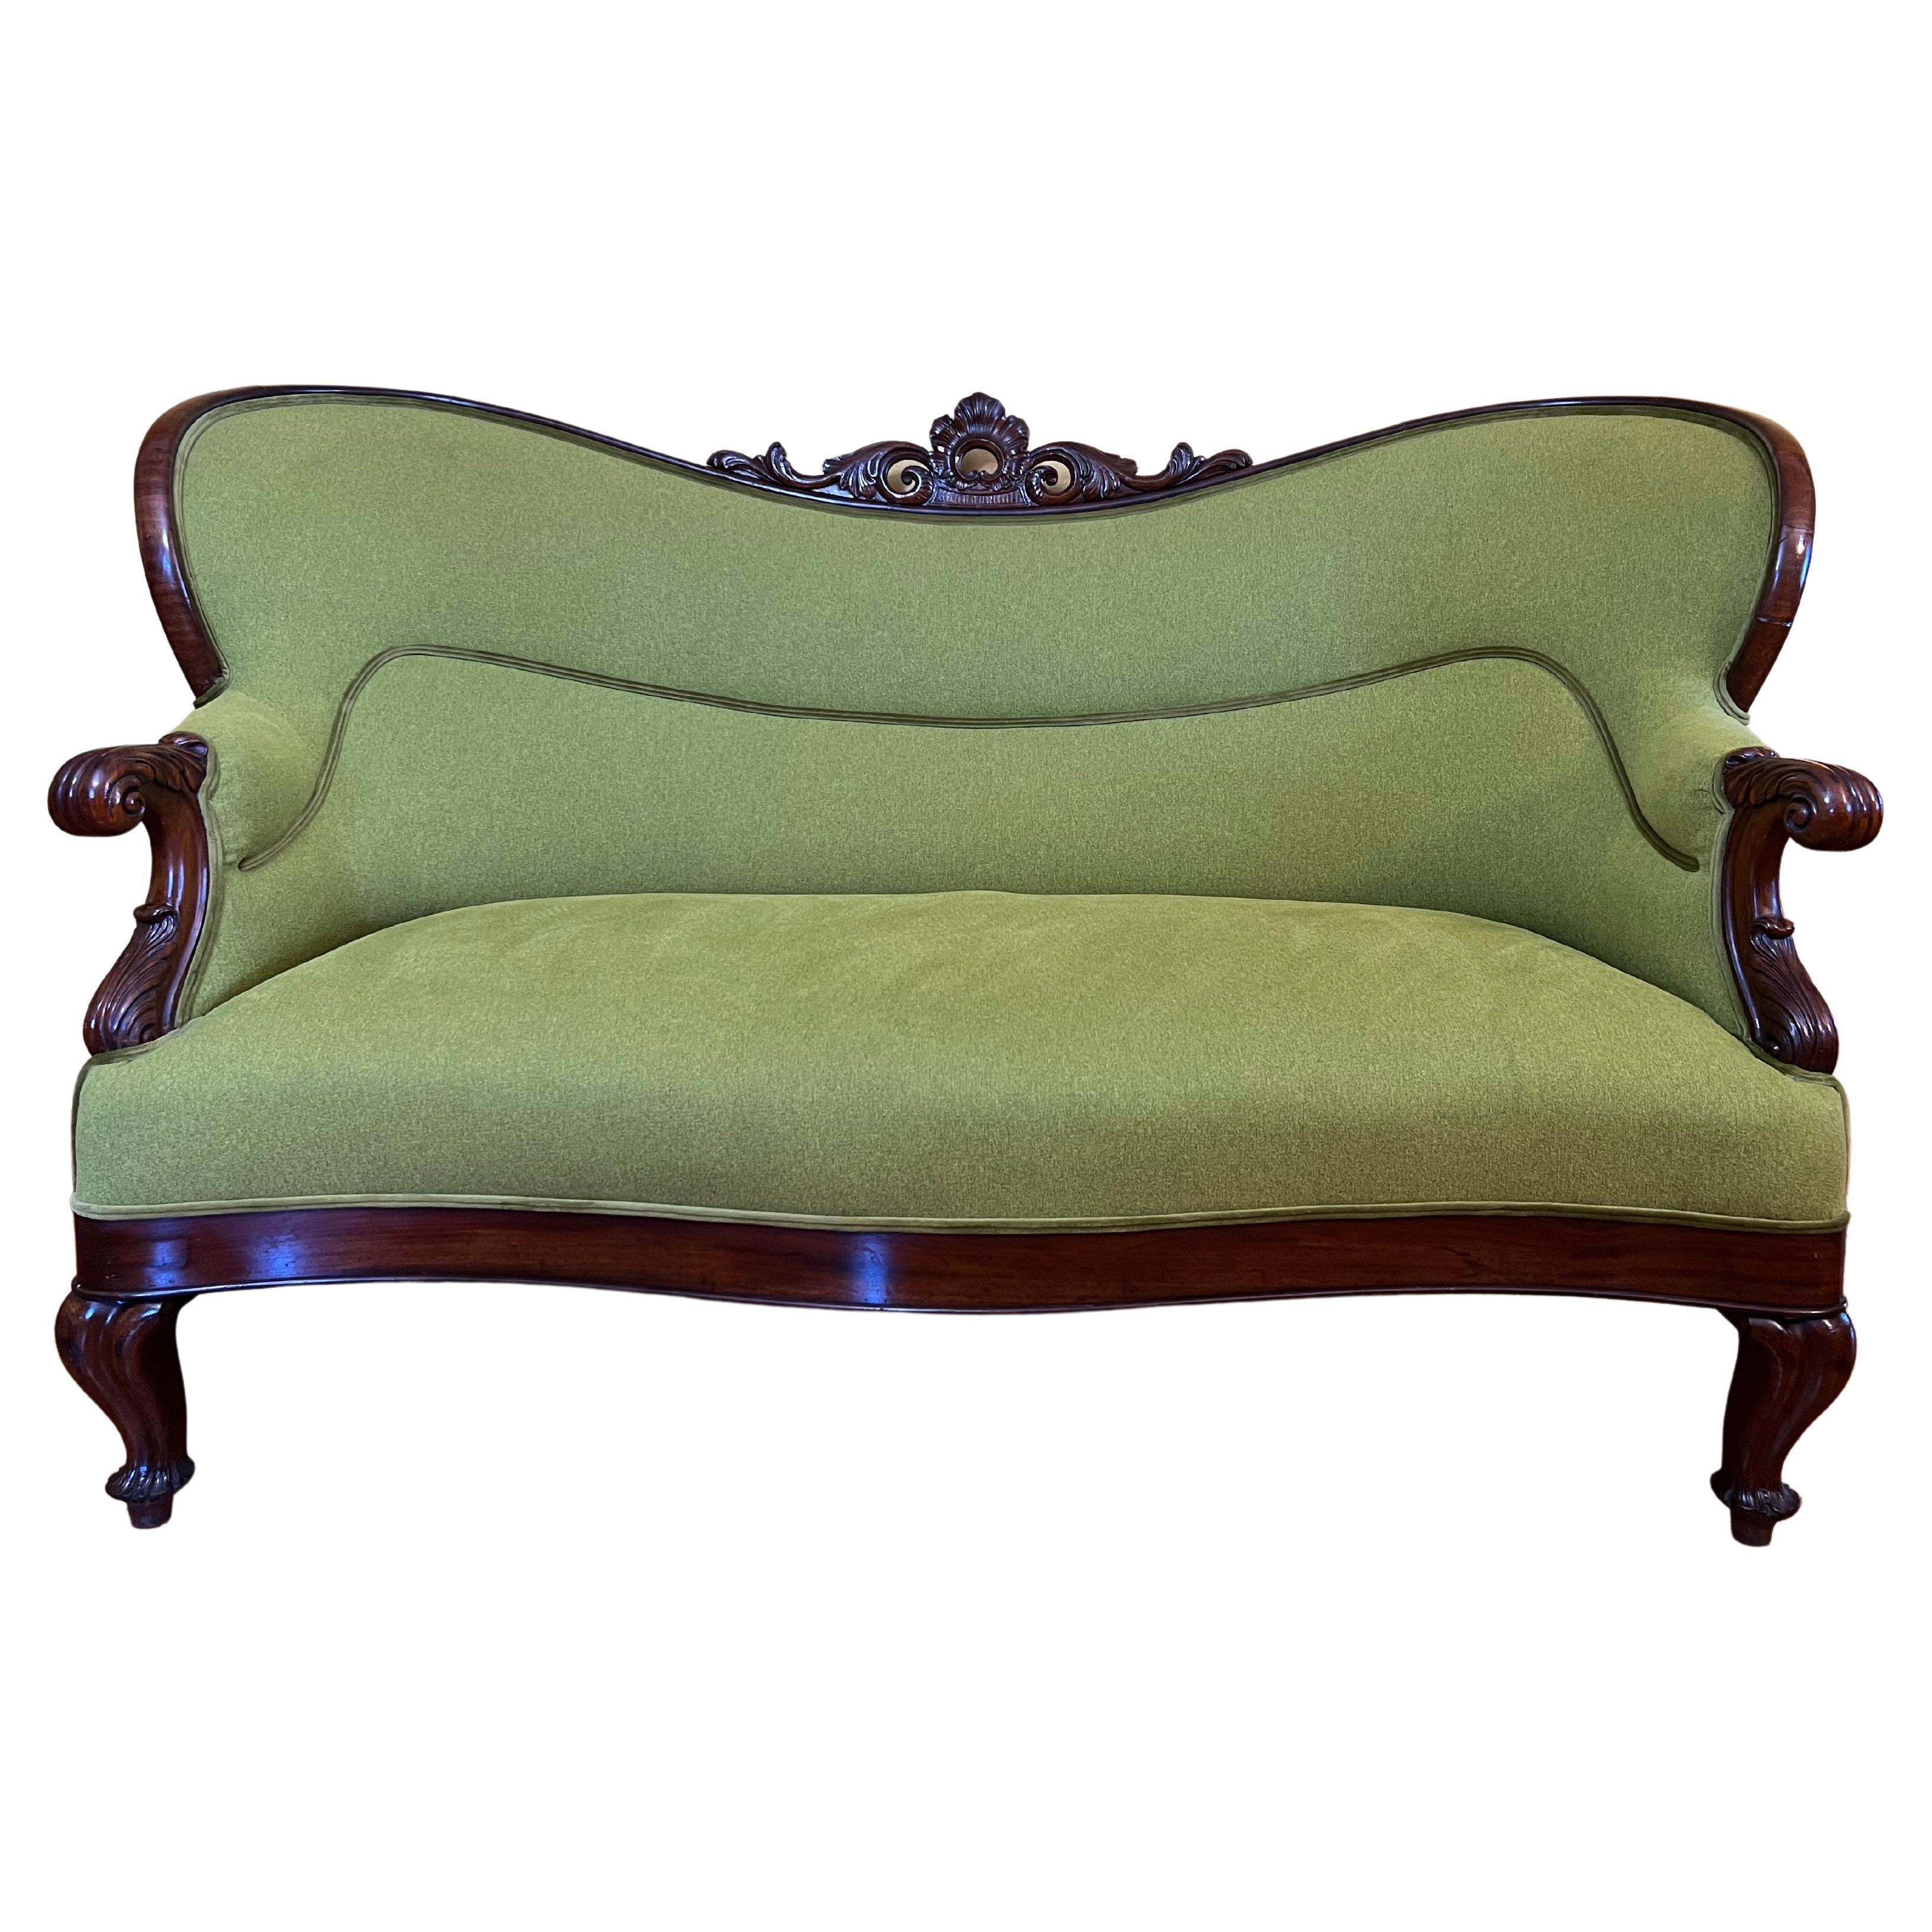 Antique French 1860 Settee, Chaise, Sofa